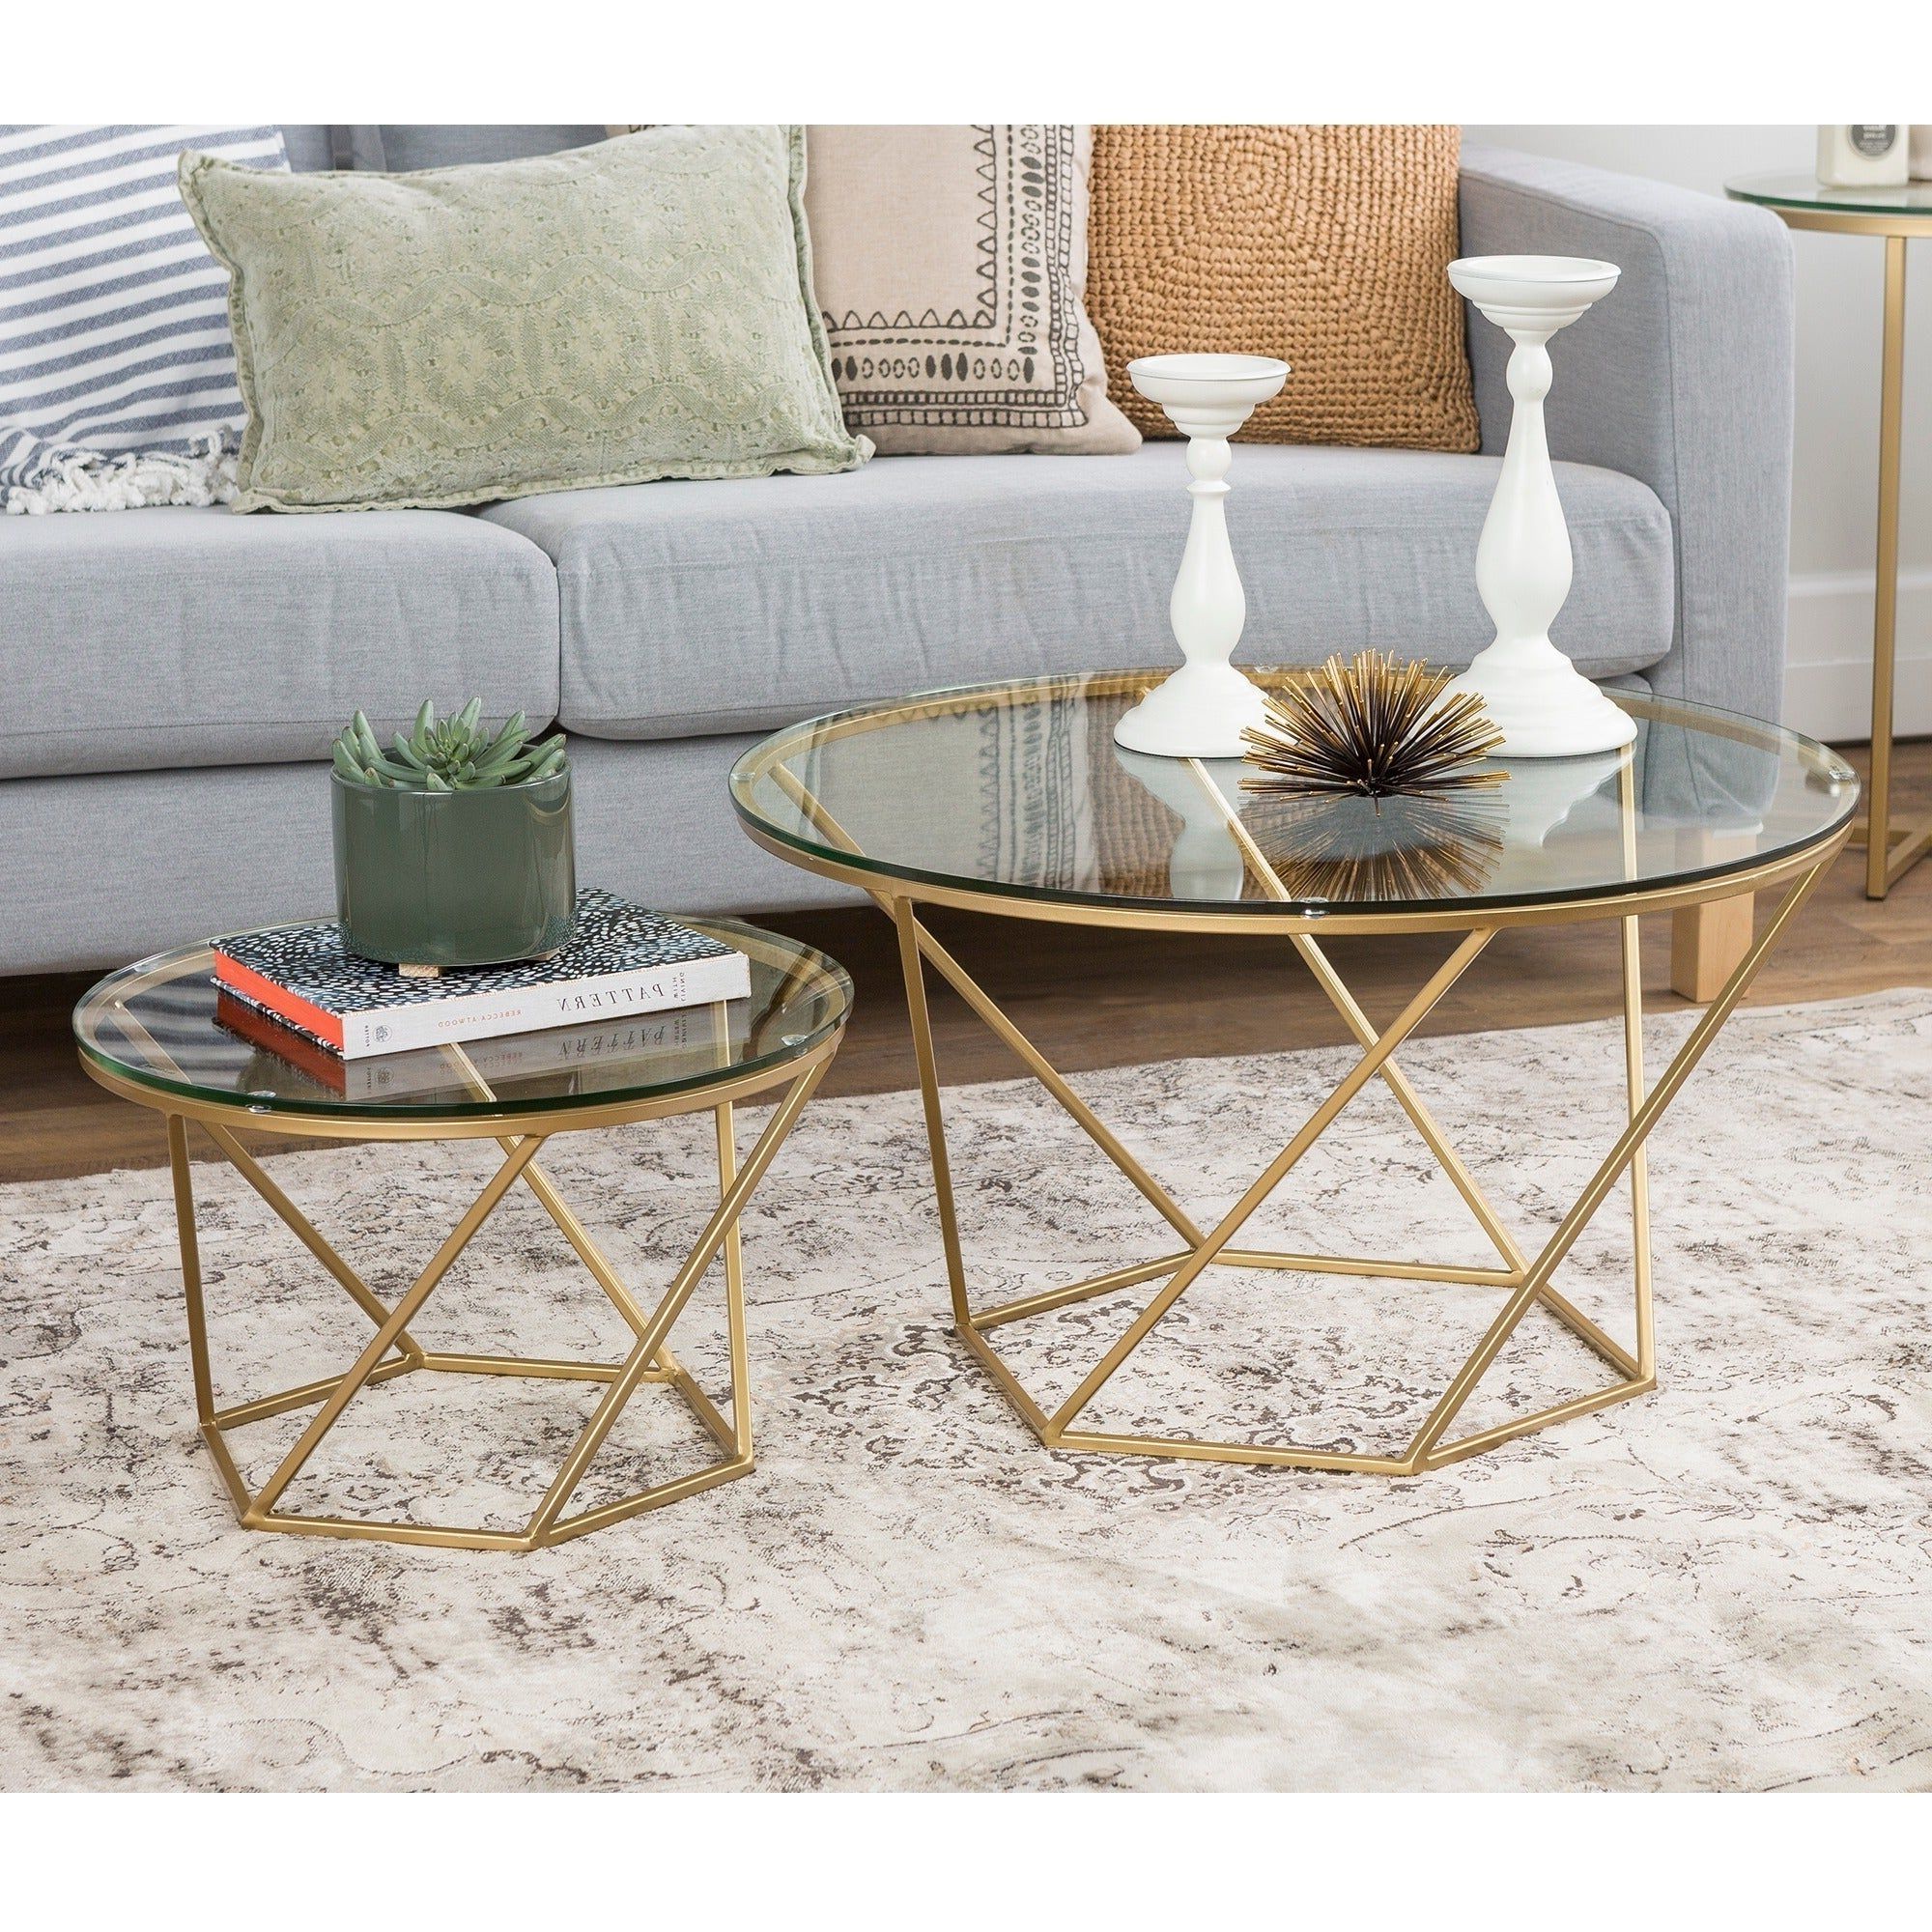 Most Recent Silver Orchid Price Glass Coffee Tables For Silver Orchid Grant Round Glass Nesting Coffee Table Set – 28 X 28 X 16h (View 10 of 20)